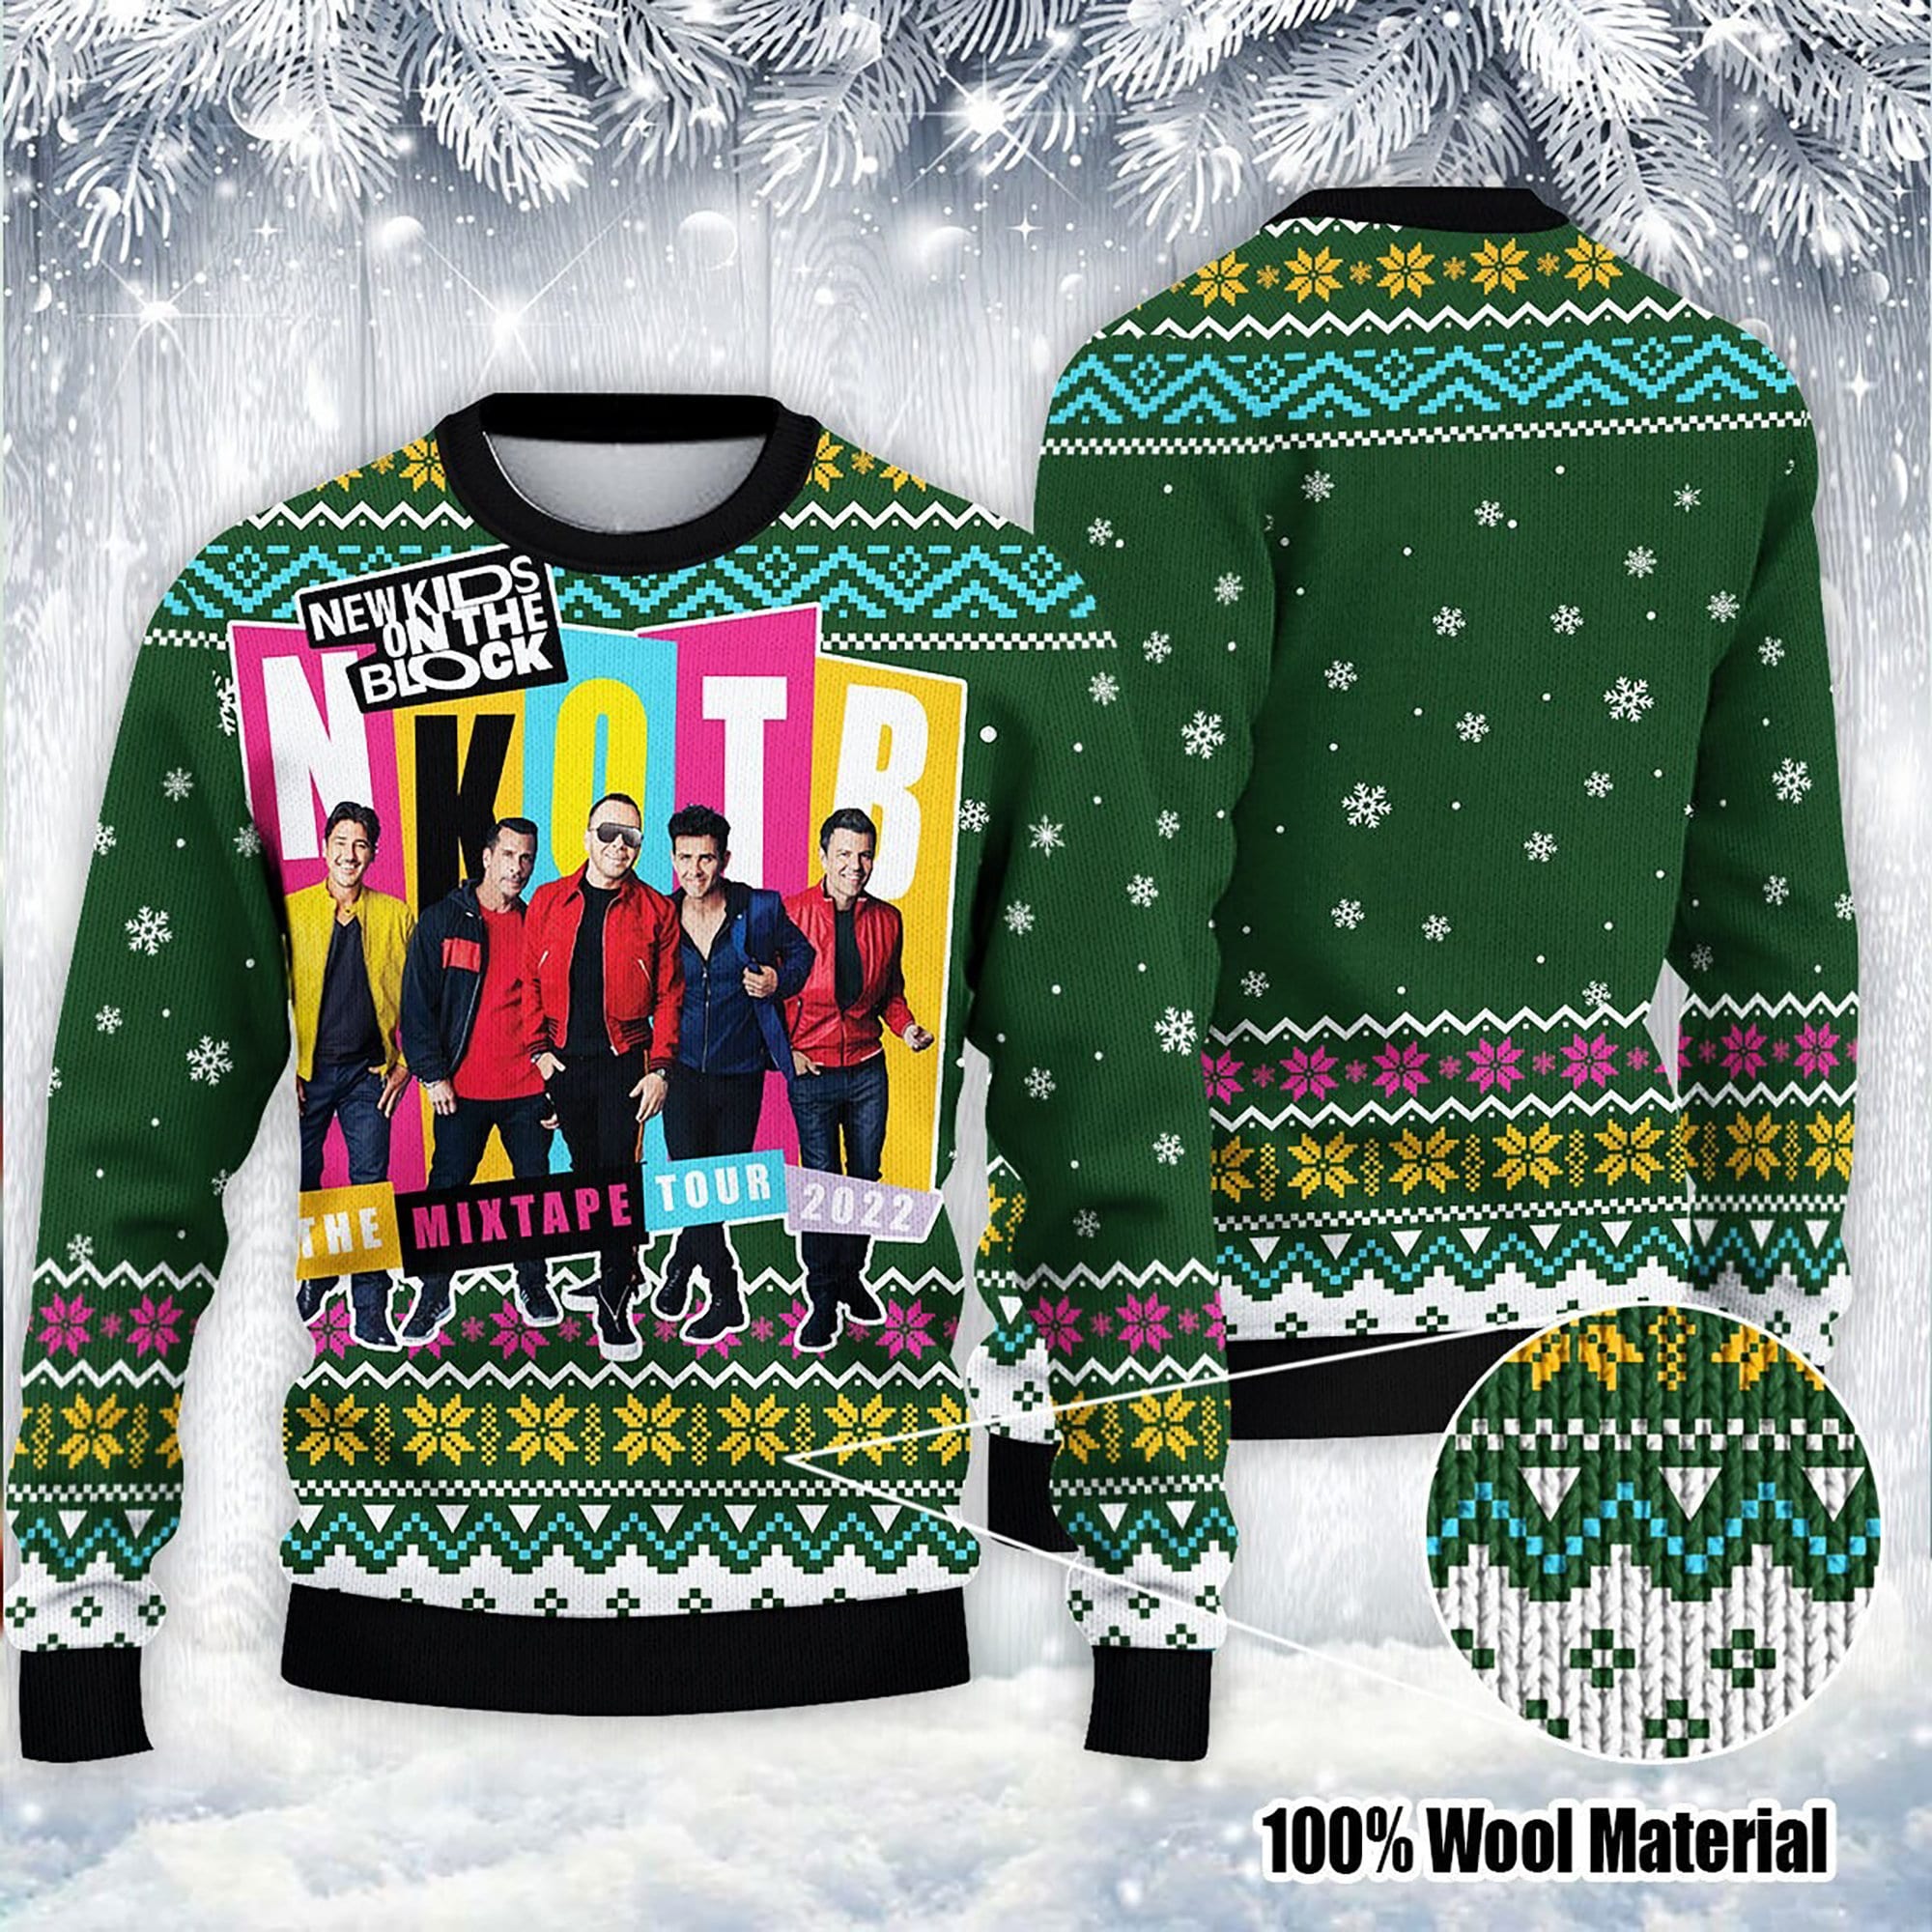 New Kids On The Block Mix Tape Tour 2022 Knitted Ugly Christmas Sweater 1